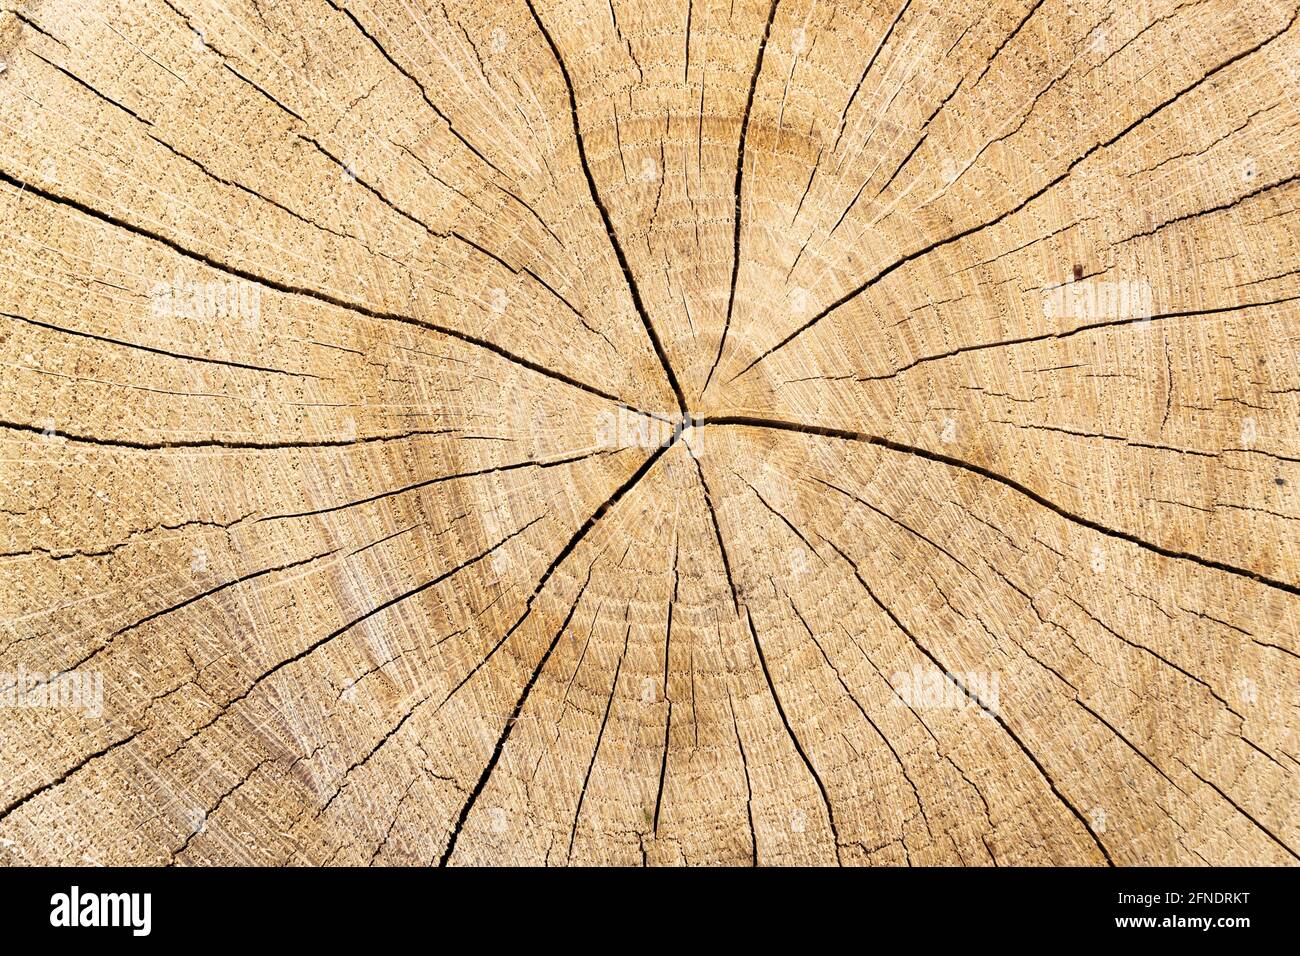 Cross section of wood close up. Tree trunk with tree rings and cracks Stock Photo